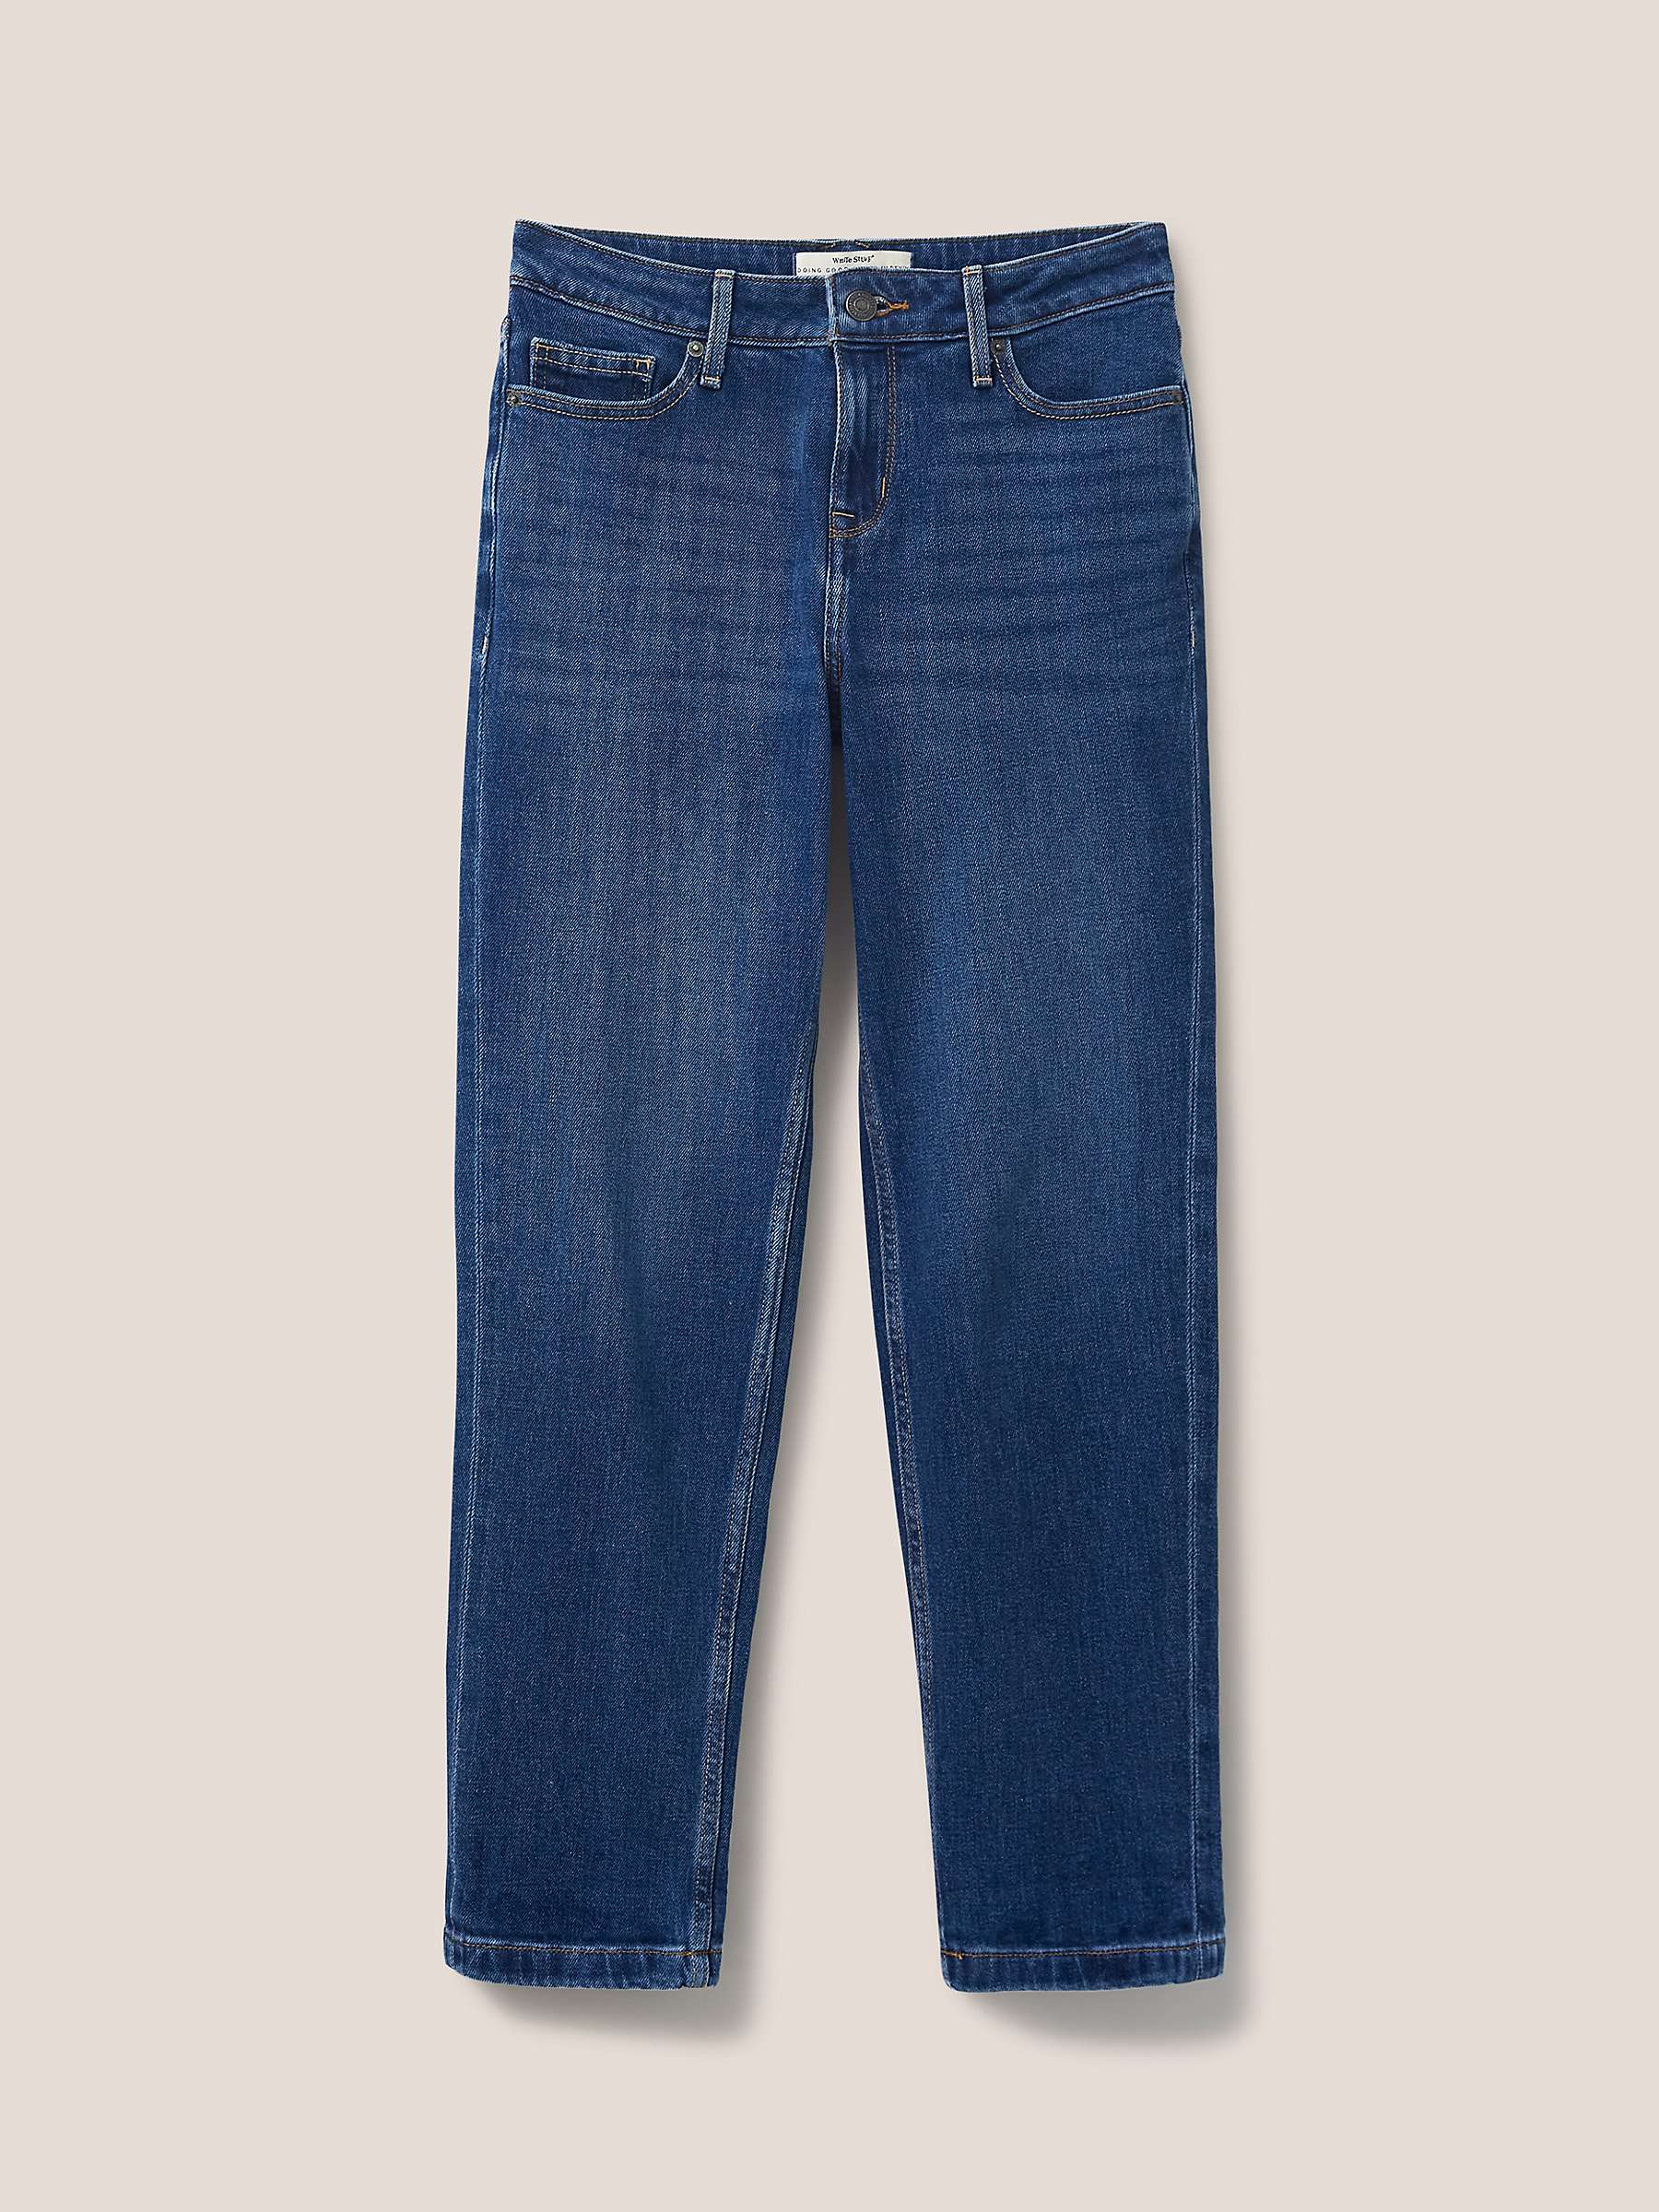 White Stuff Katy Relaxed Slim Fit Jeans, Mid Denim at John Lewis & Partners